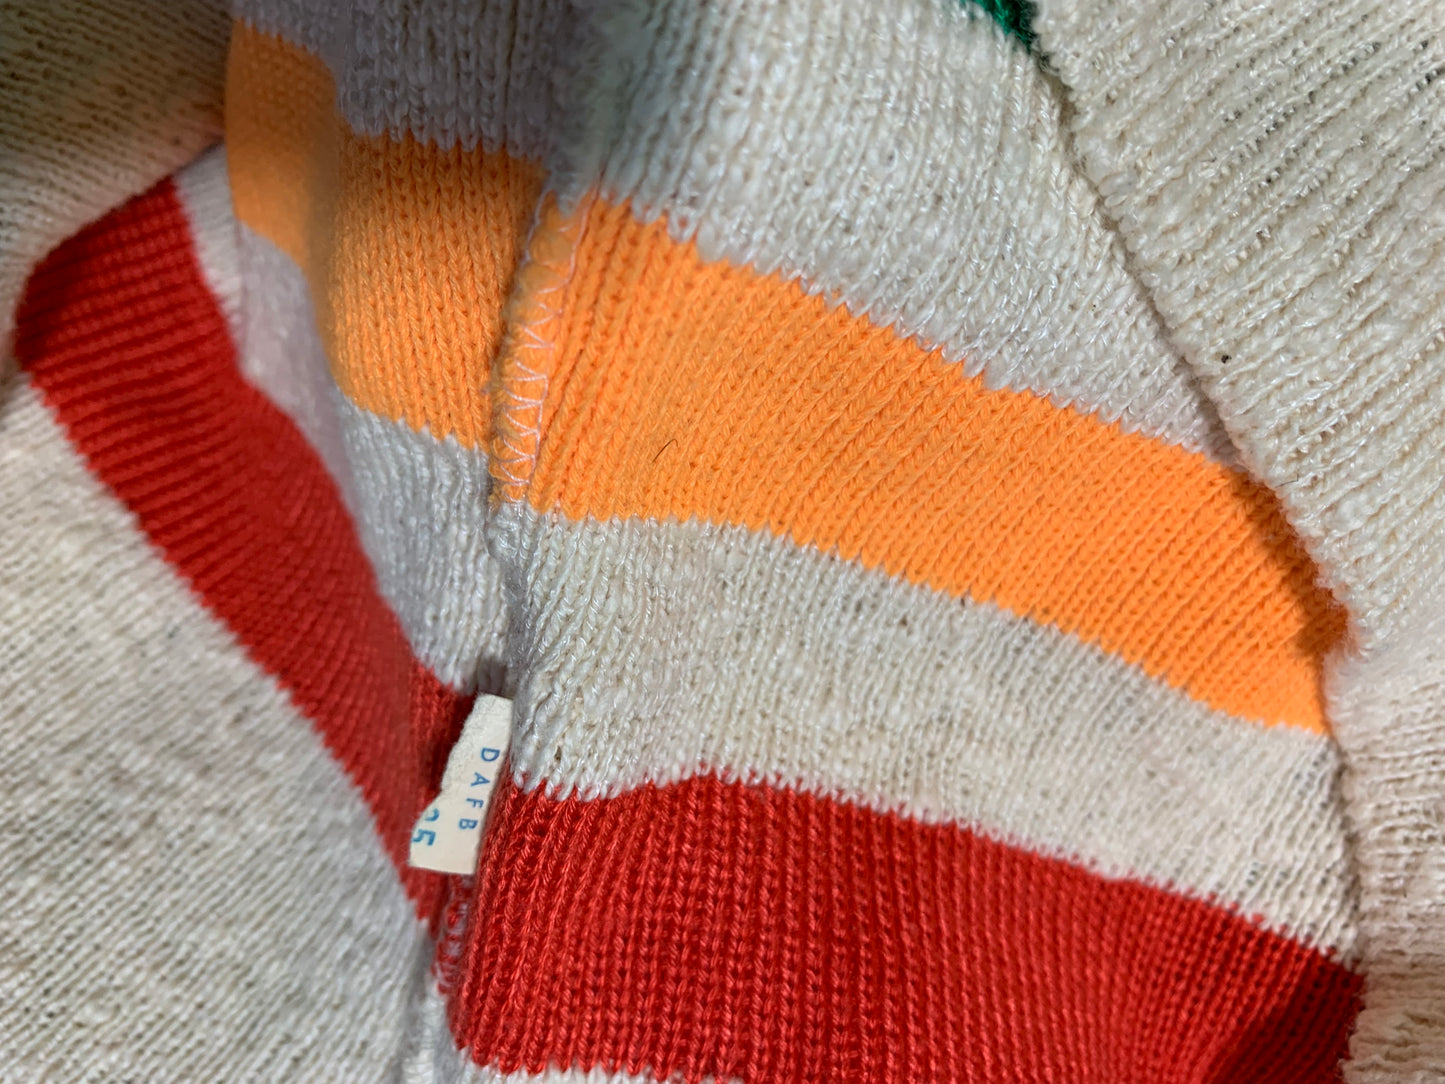 Sporty Striped Bateau Knit Sweater with Red Lacing On Shoulders circa 1970s